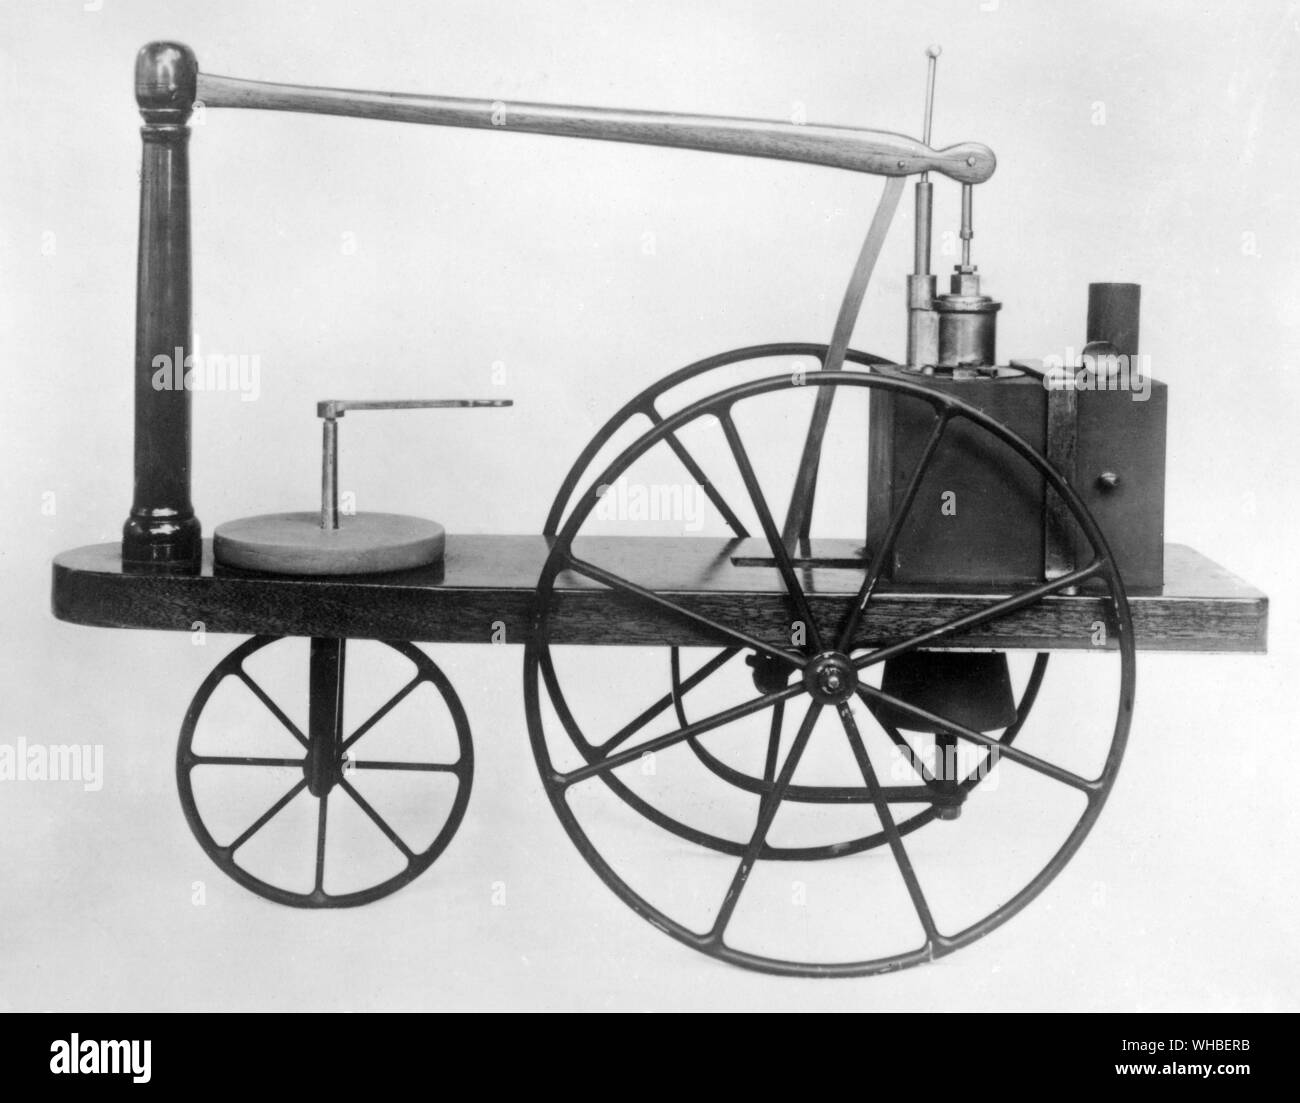 Murdock's Locomotive Model of 1784-6 of Watt 's firstdesign for a locomotive.. William Murdoch (sometimes spelled Murdock) (August 21, 1754 - November 15, 1839) was a Scottish engineer and inventor. It is believed that his name was Anglicised to Murdock when he moved to England. He was employed by the firm of Boulton and Watt and worked for them in Cornwall as a steam engine erector for ten years, spending most of the rest of his life in Birmingham. He was the inventor of gas lighting in the early 1790s and coined the term gasometer. He also made a number of innovations to the steam engine, Stock Photo